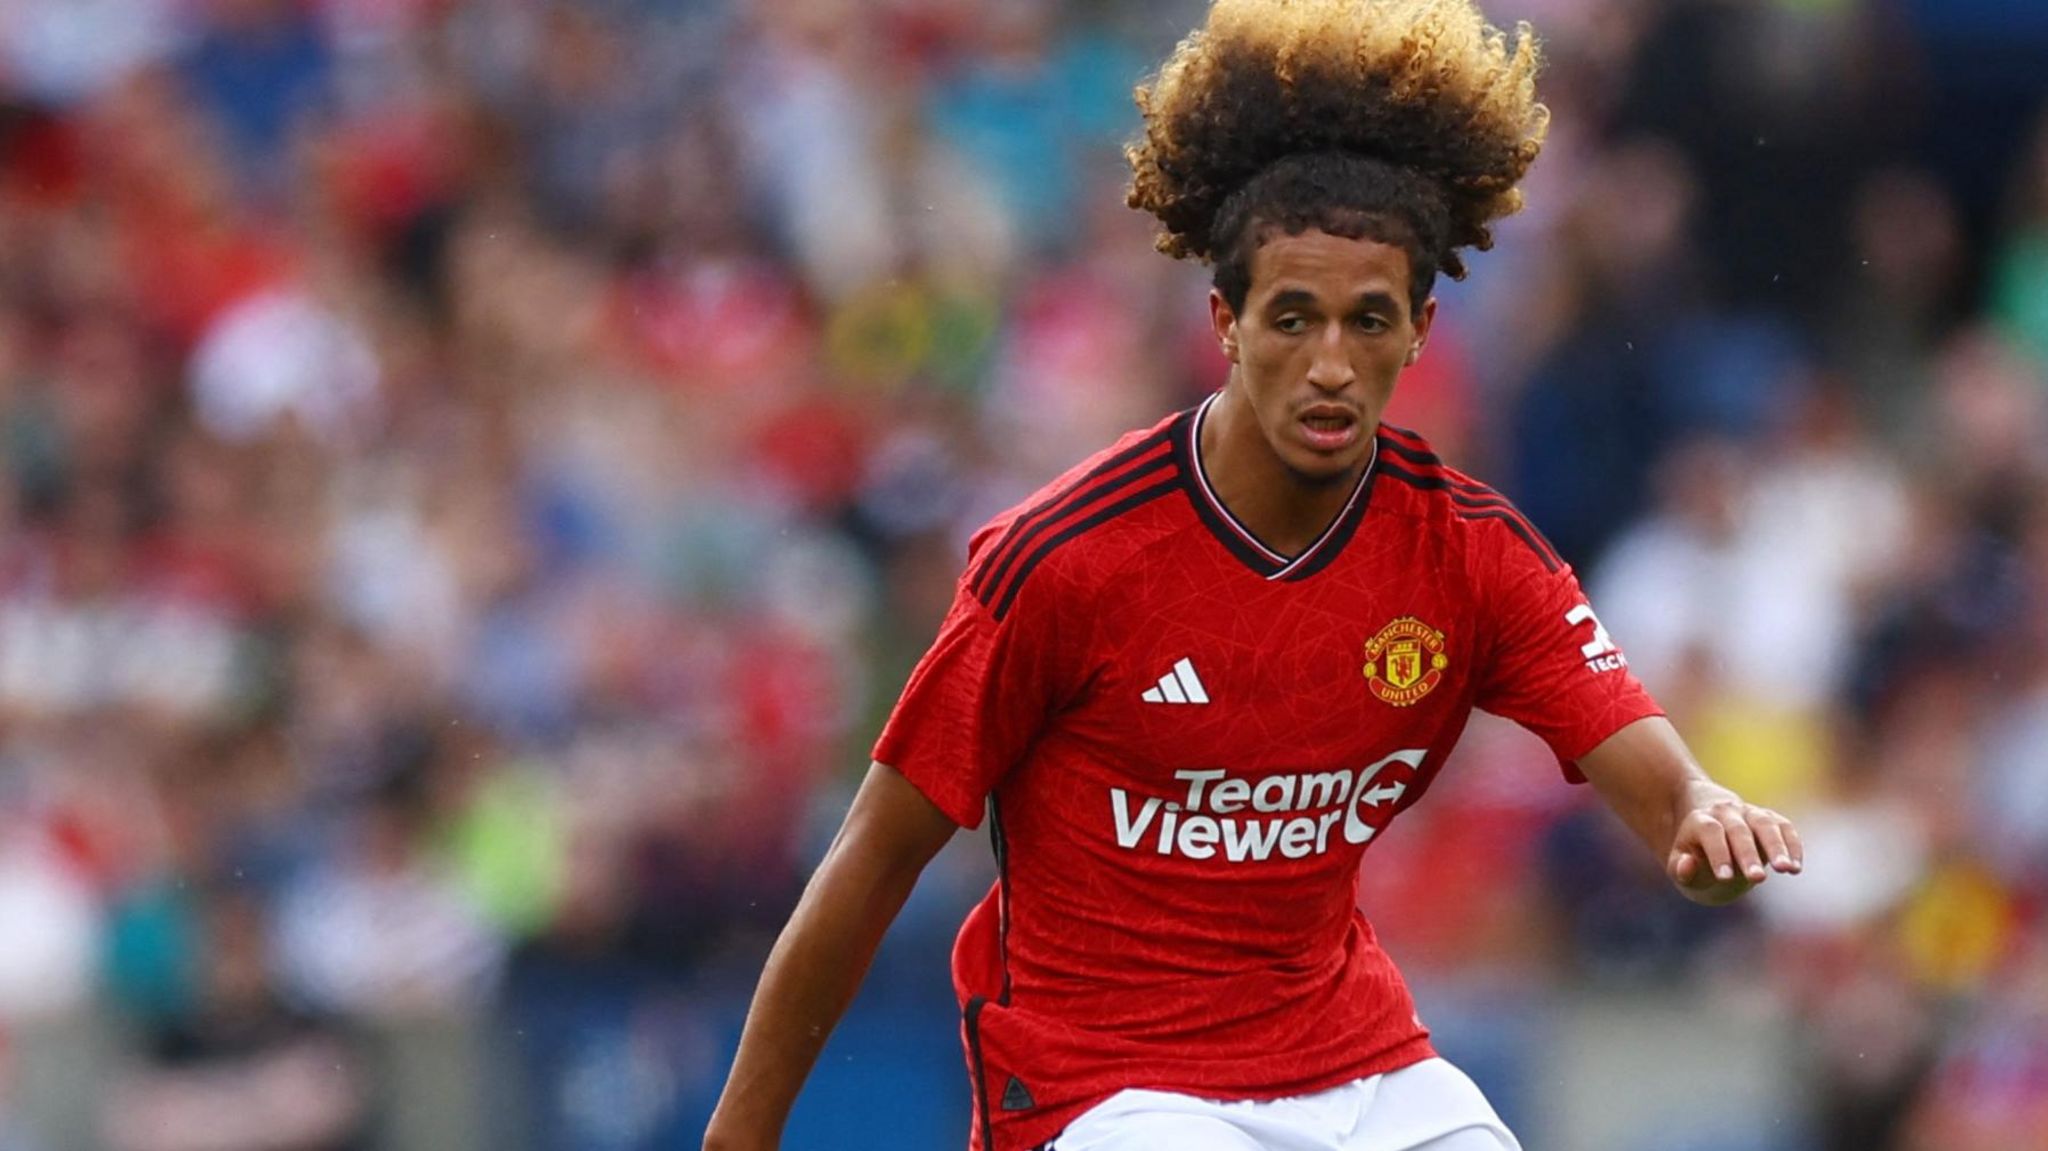 Man Utd: Could Hannibal Mejbri become 'viable contender' for midfield spot?  - BBC Sport